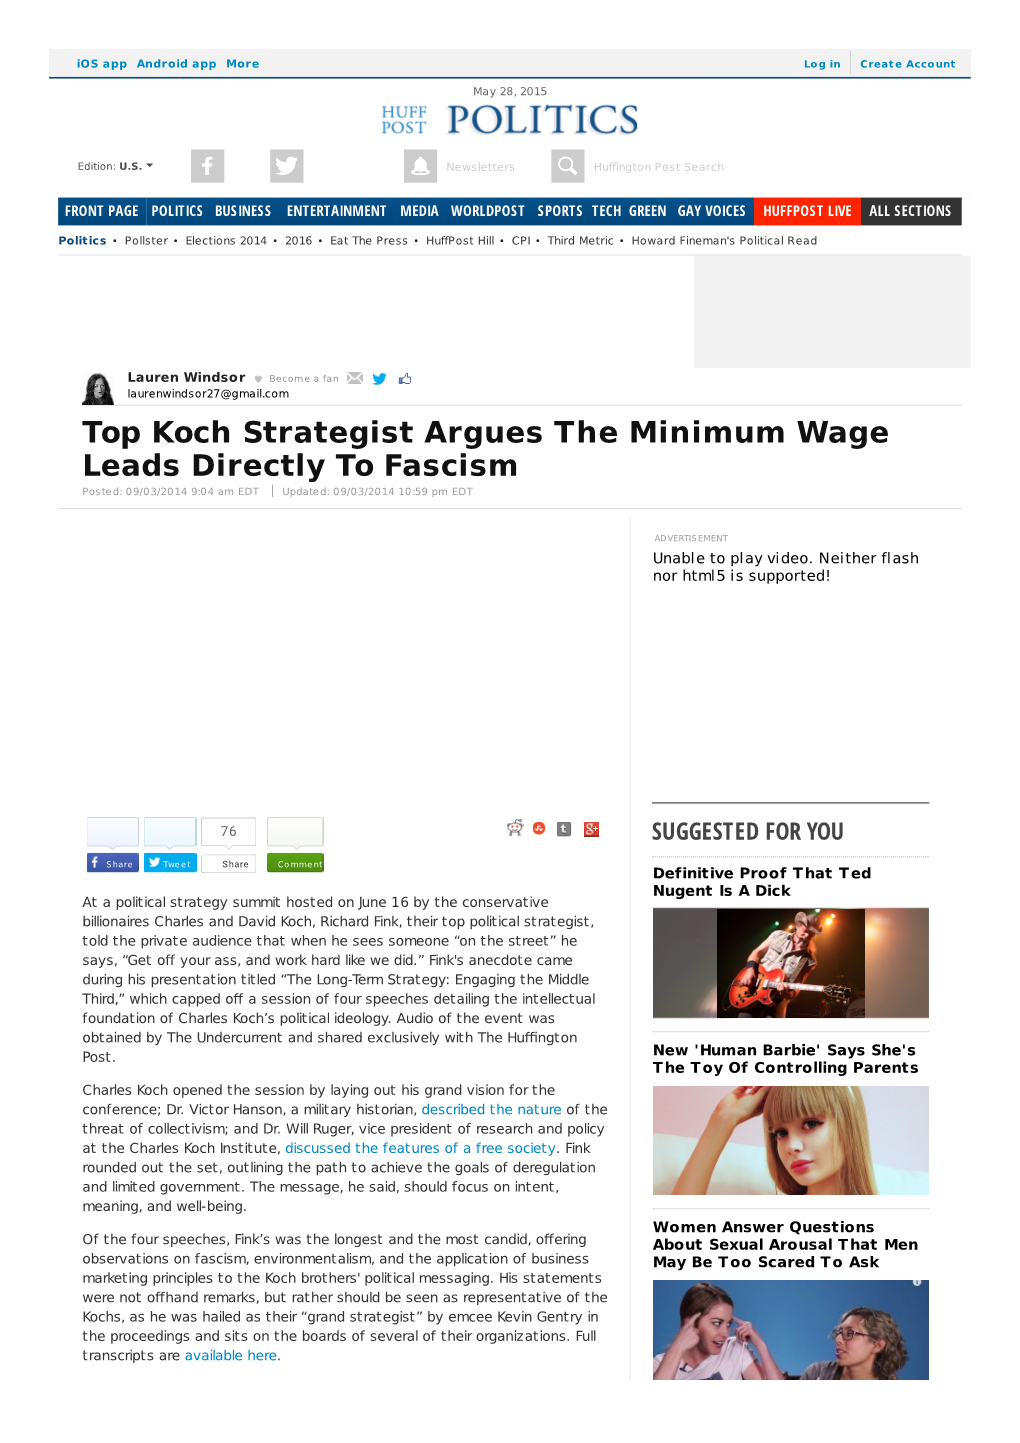 Top Koch Strategist Argues the Minimum Wage Leads Directly to Fascism Posted: 09/03/2014 9:04 Am EDT Updated: 09/03/2014 10:59 Pm EDT